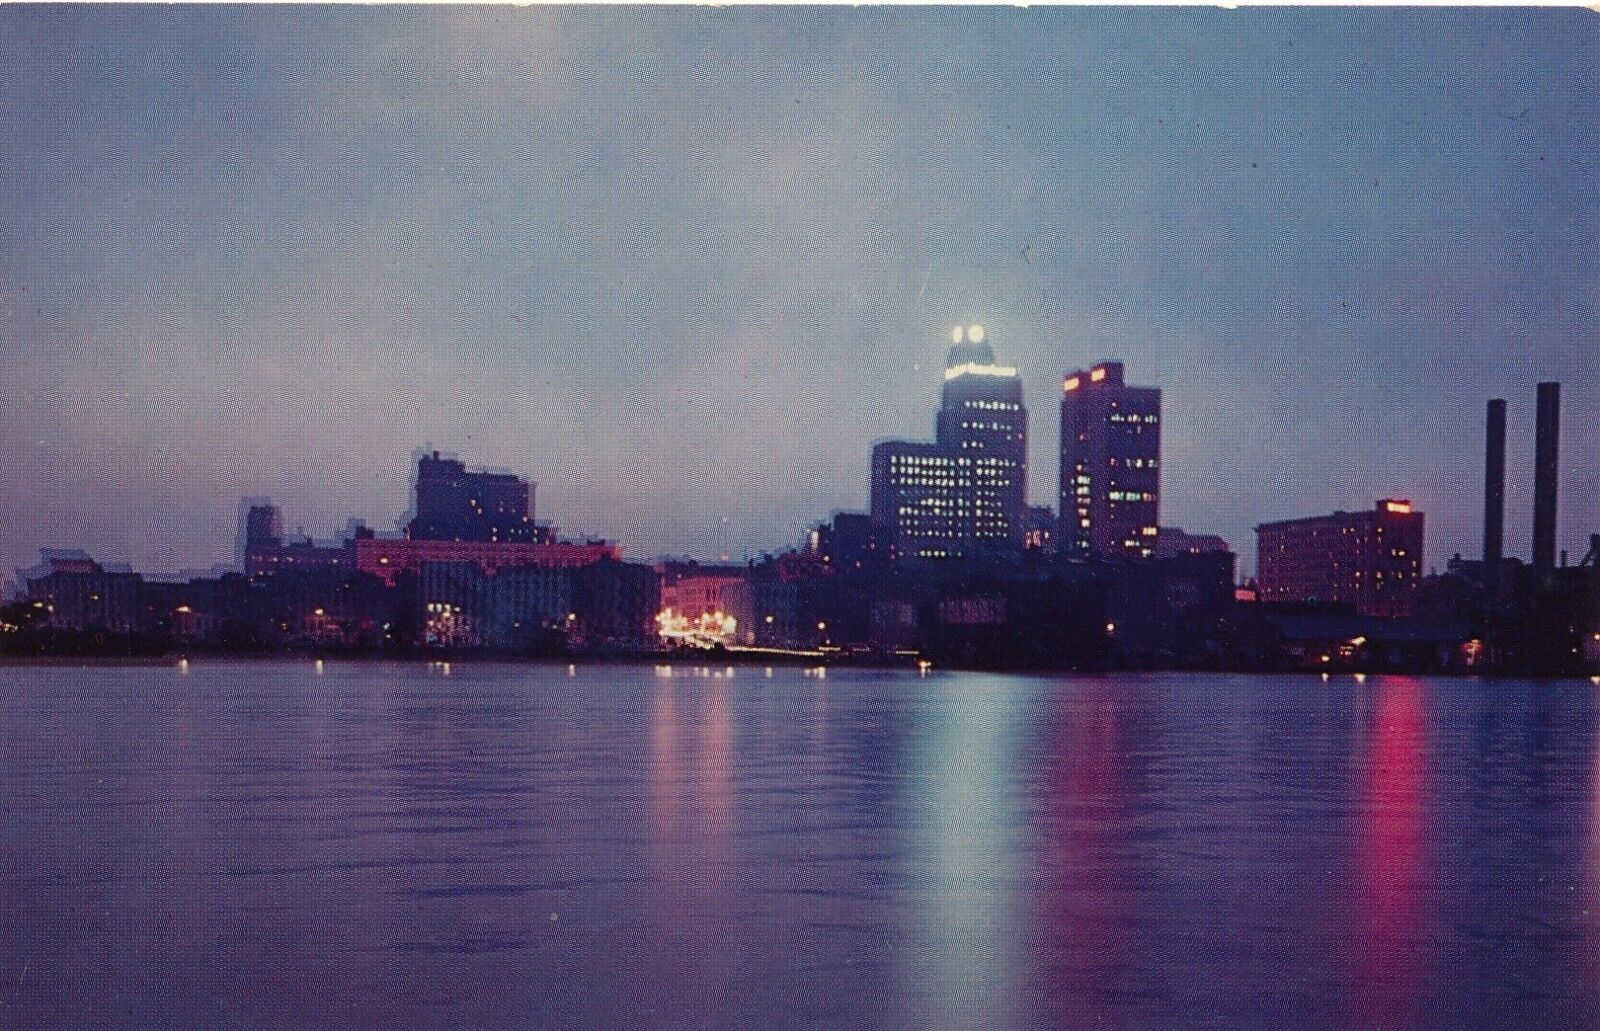 Across the Maumee River toward Downtown Toldeo, Ohio Night 1963 postcard